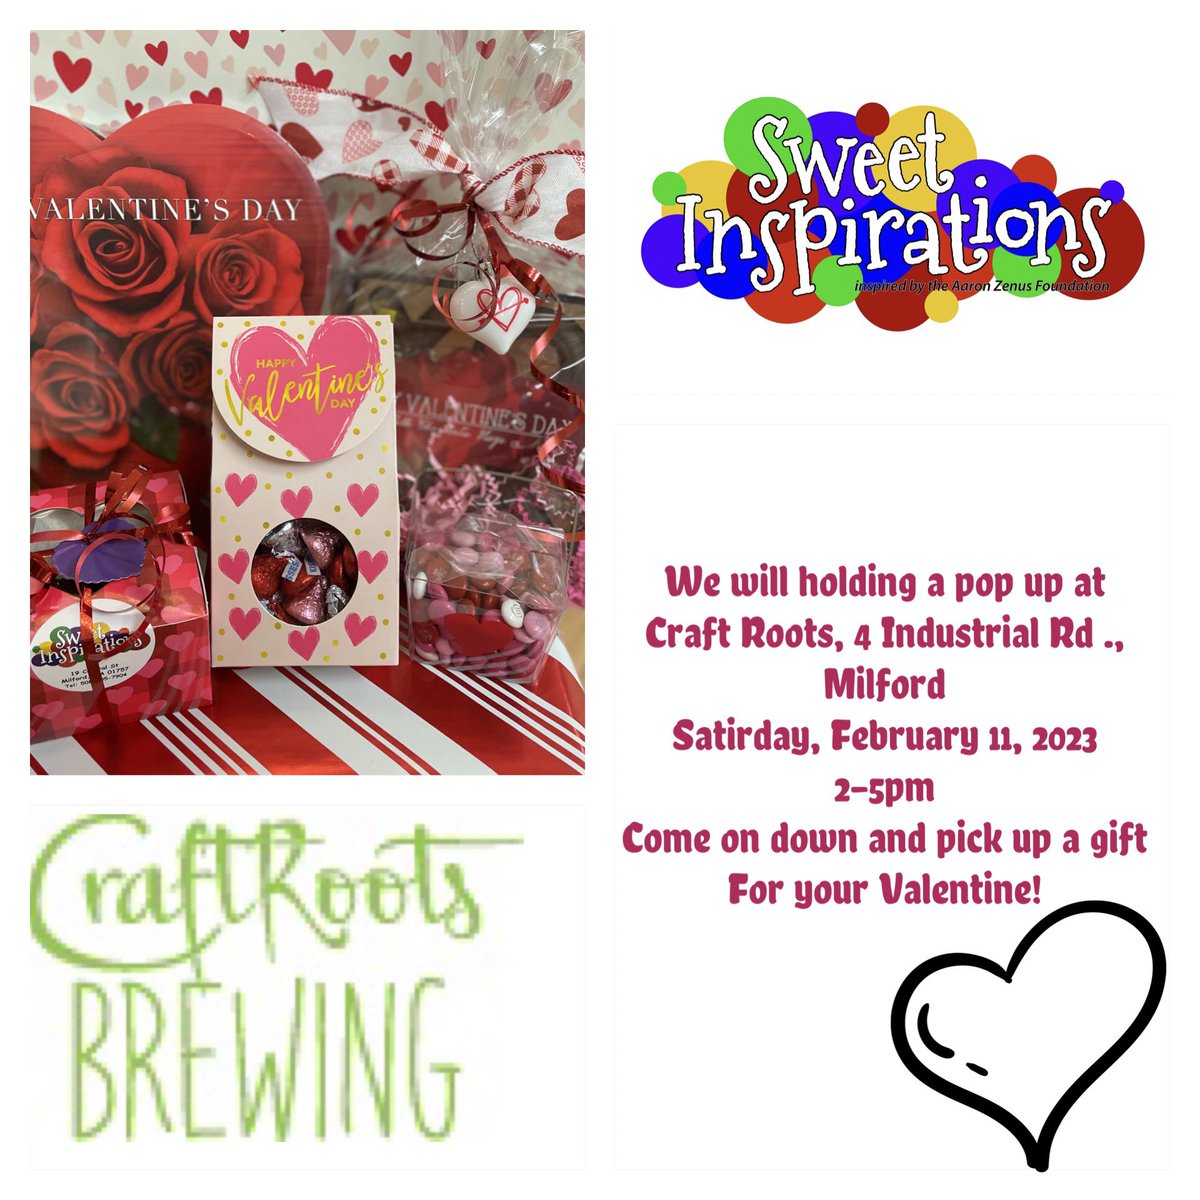 Come on down to Craft Roots this Saturday and support Sweet Inspirations! We will be there from 2-5pm! @FoundationZenus @jwalsh_jennifer